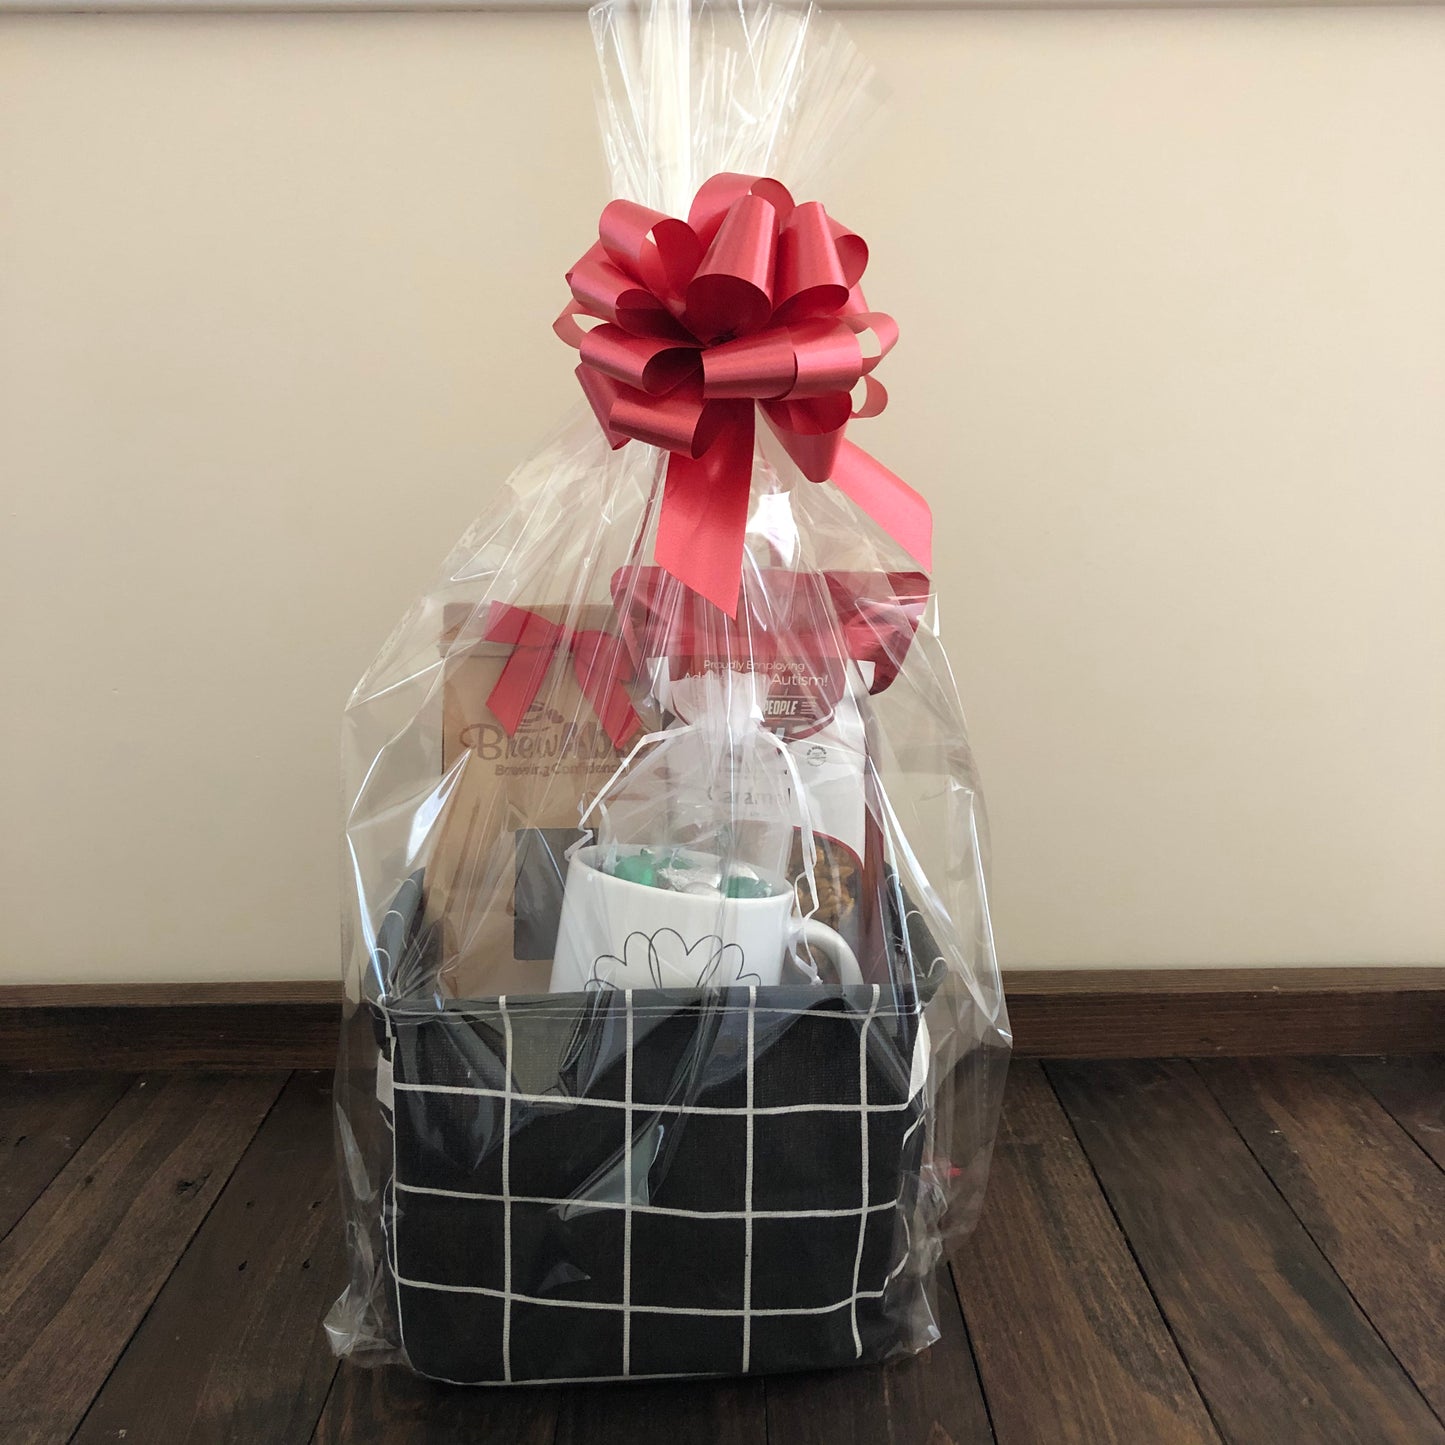 Holiday Edition: "Just Because" Basket